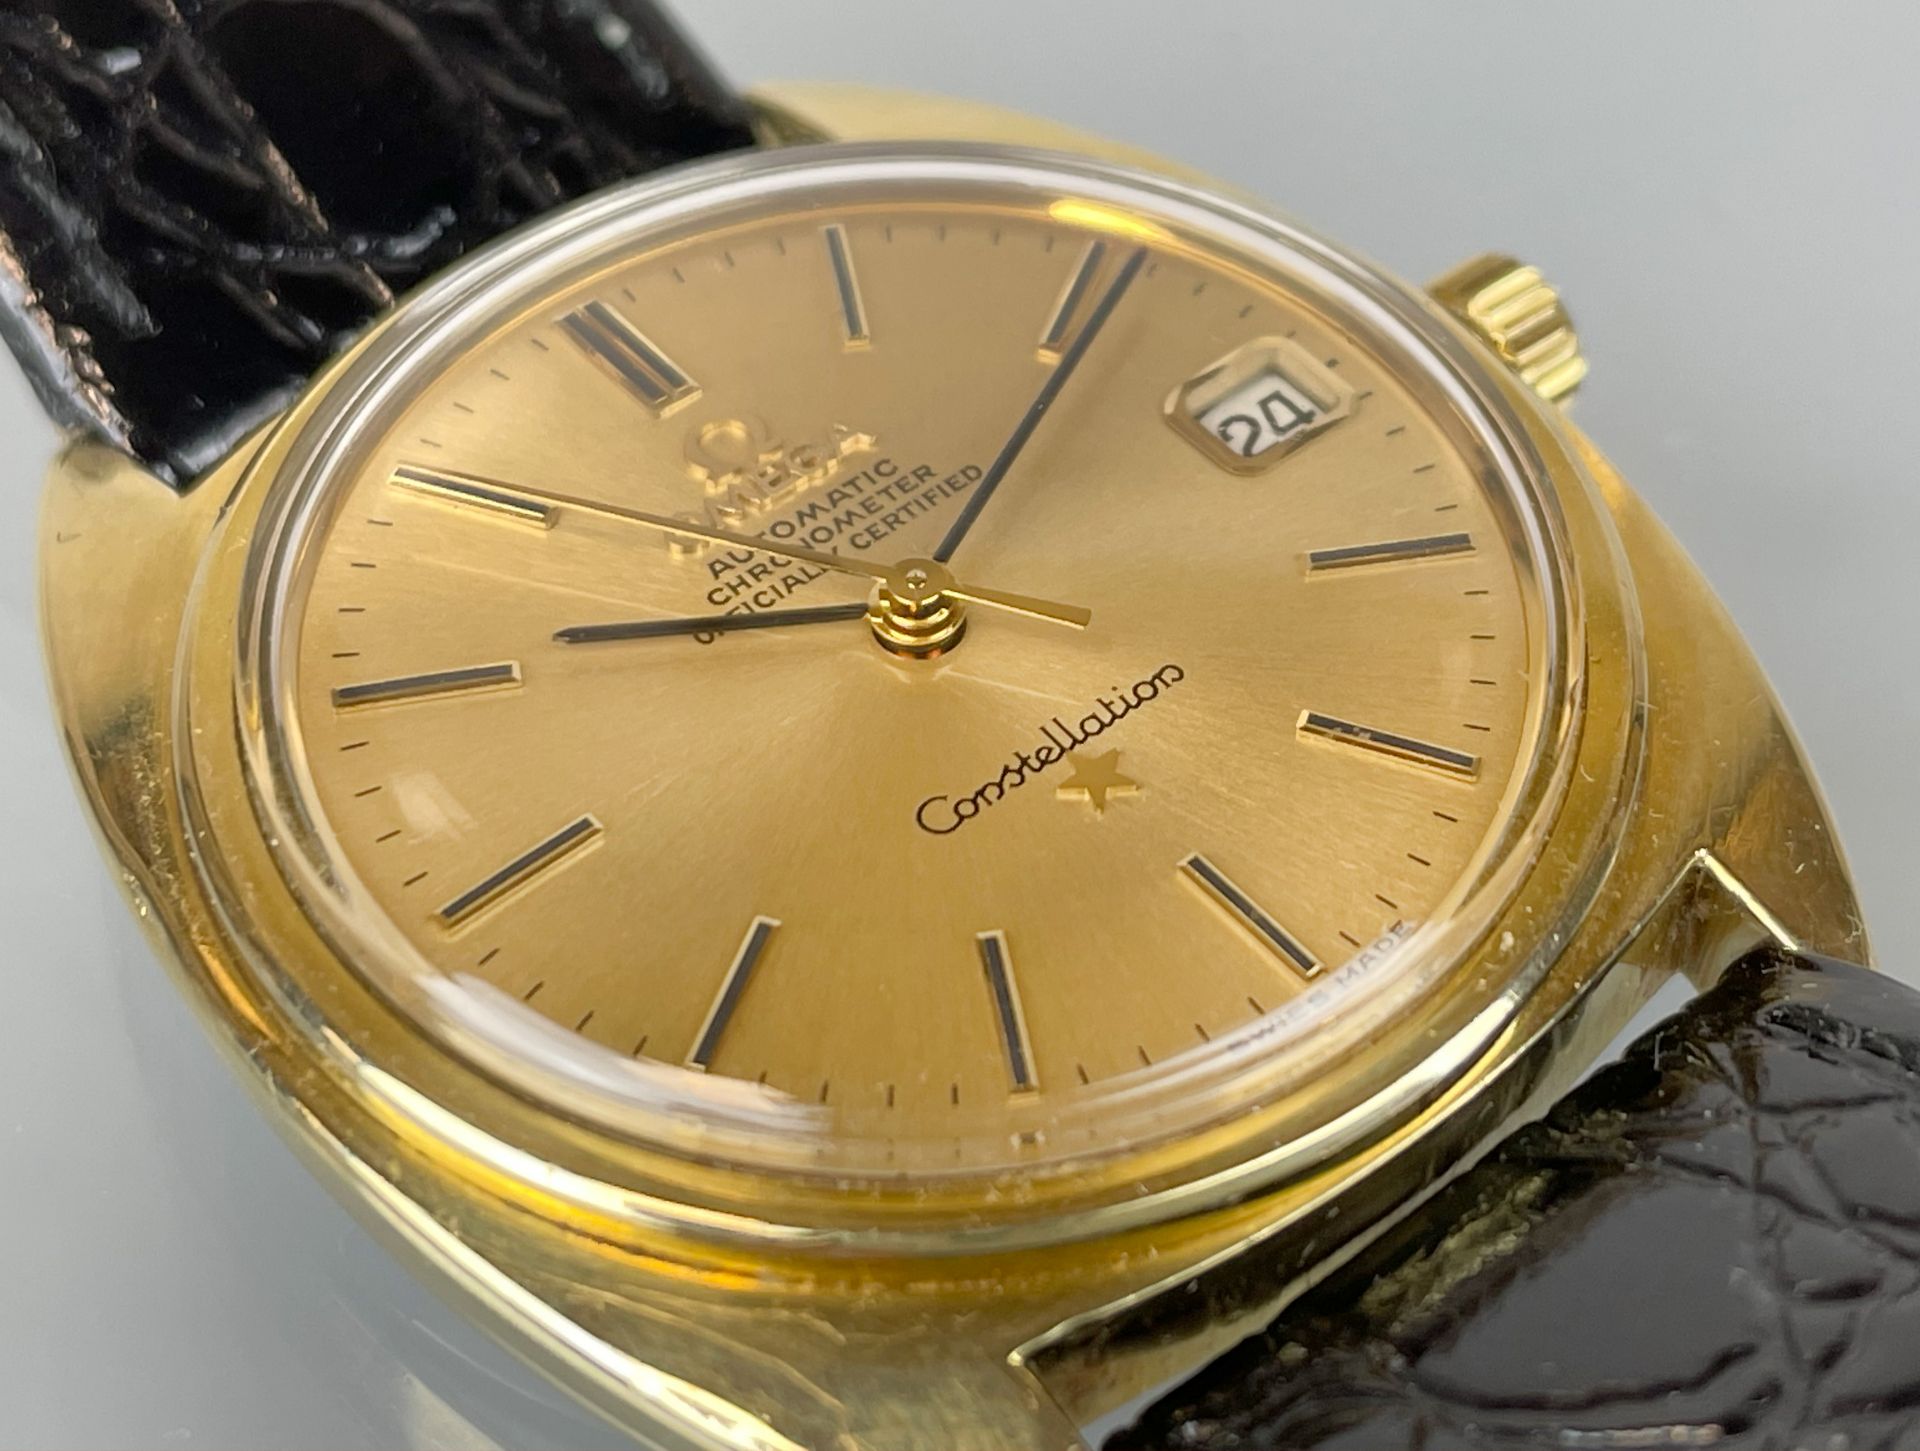 Men's wristwatch OMEGA Constellation. Chronometer. Automatic. Swiss. Vintage. - Image 5 of 7